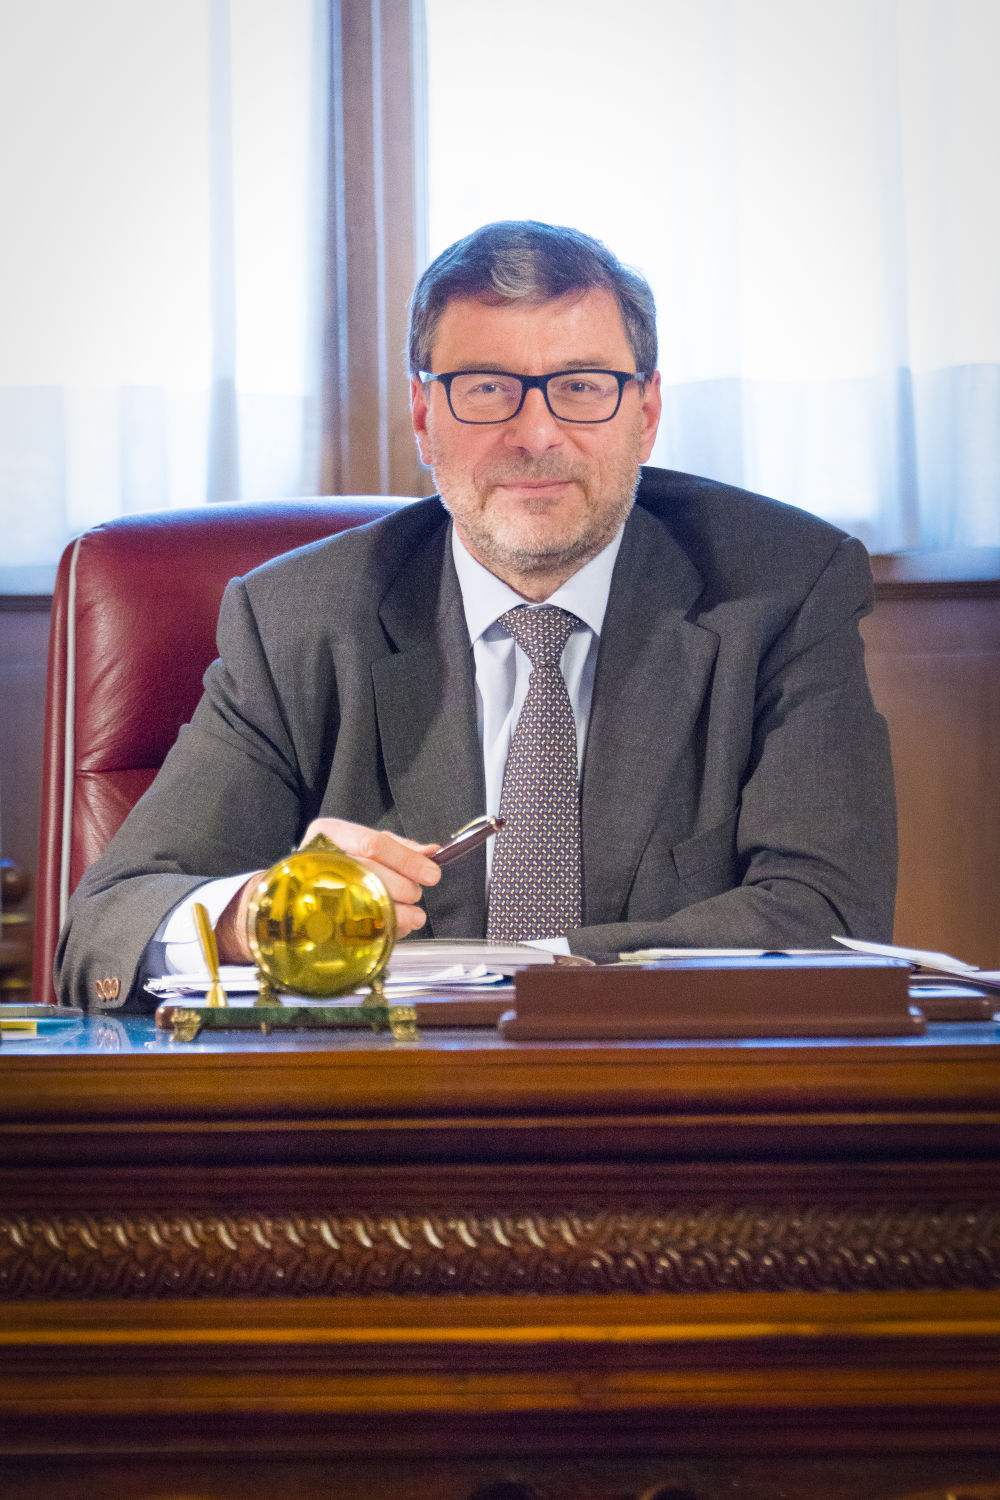 Mr. Giancarlo Giorgetti - Minister of Economy and Finance